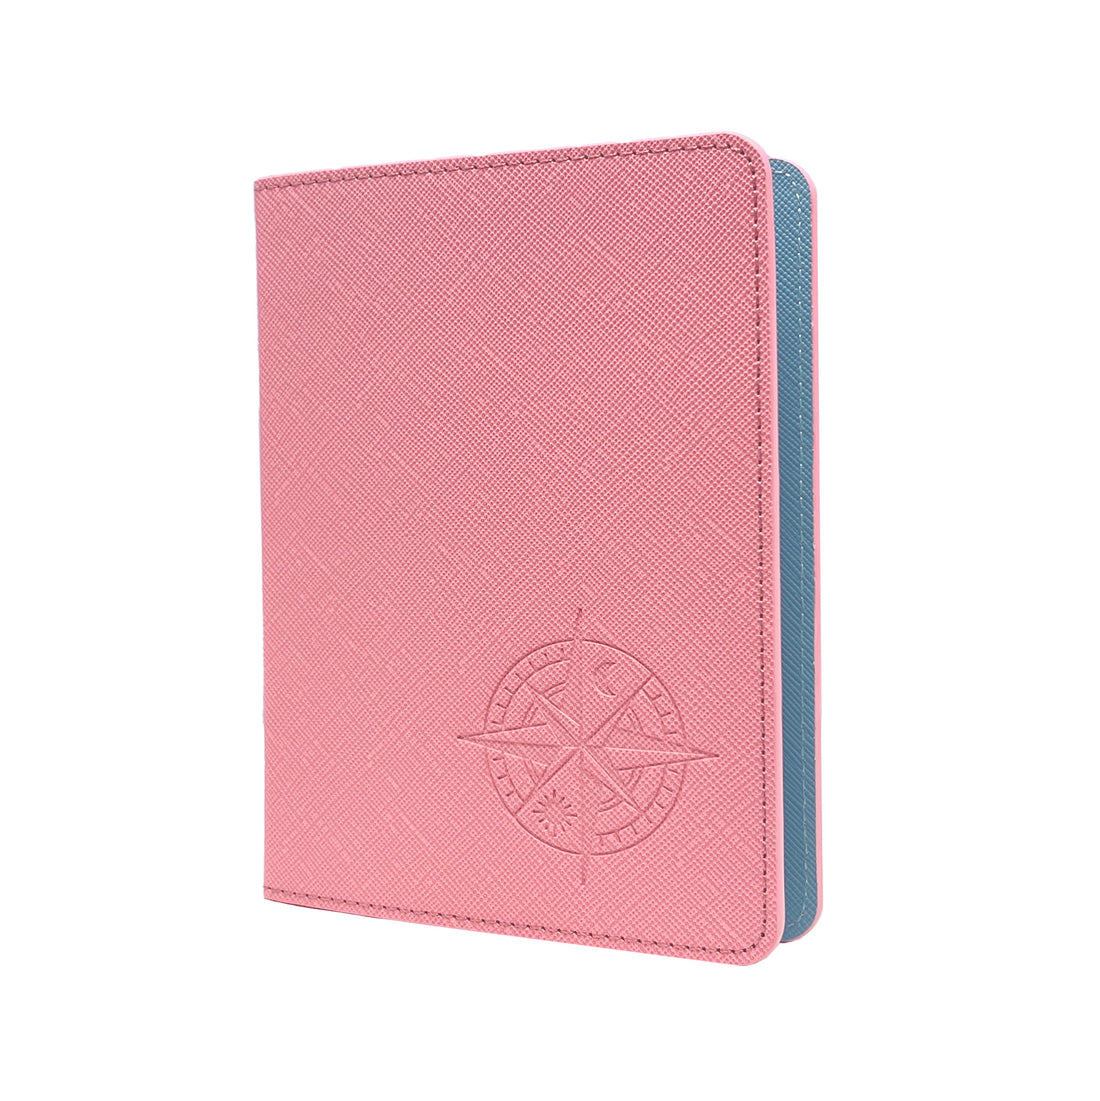 Pocket Size DUO Planner【Pink Beach】